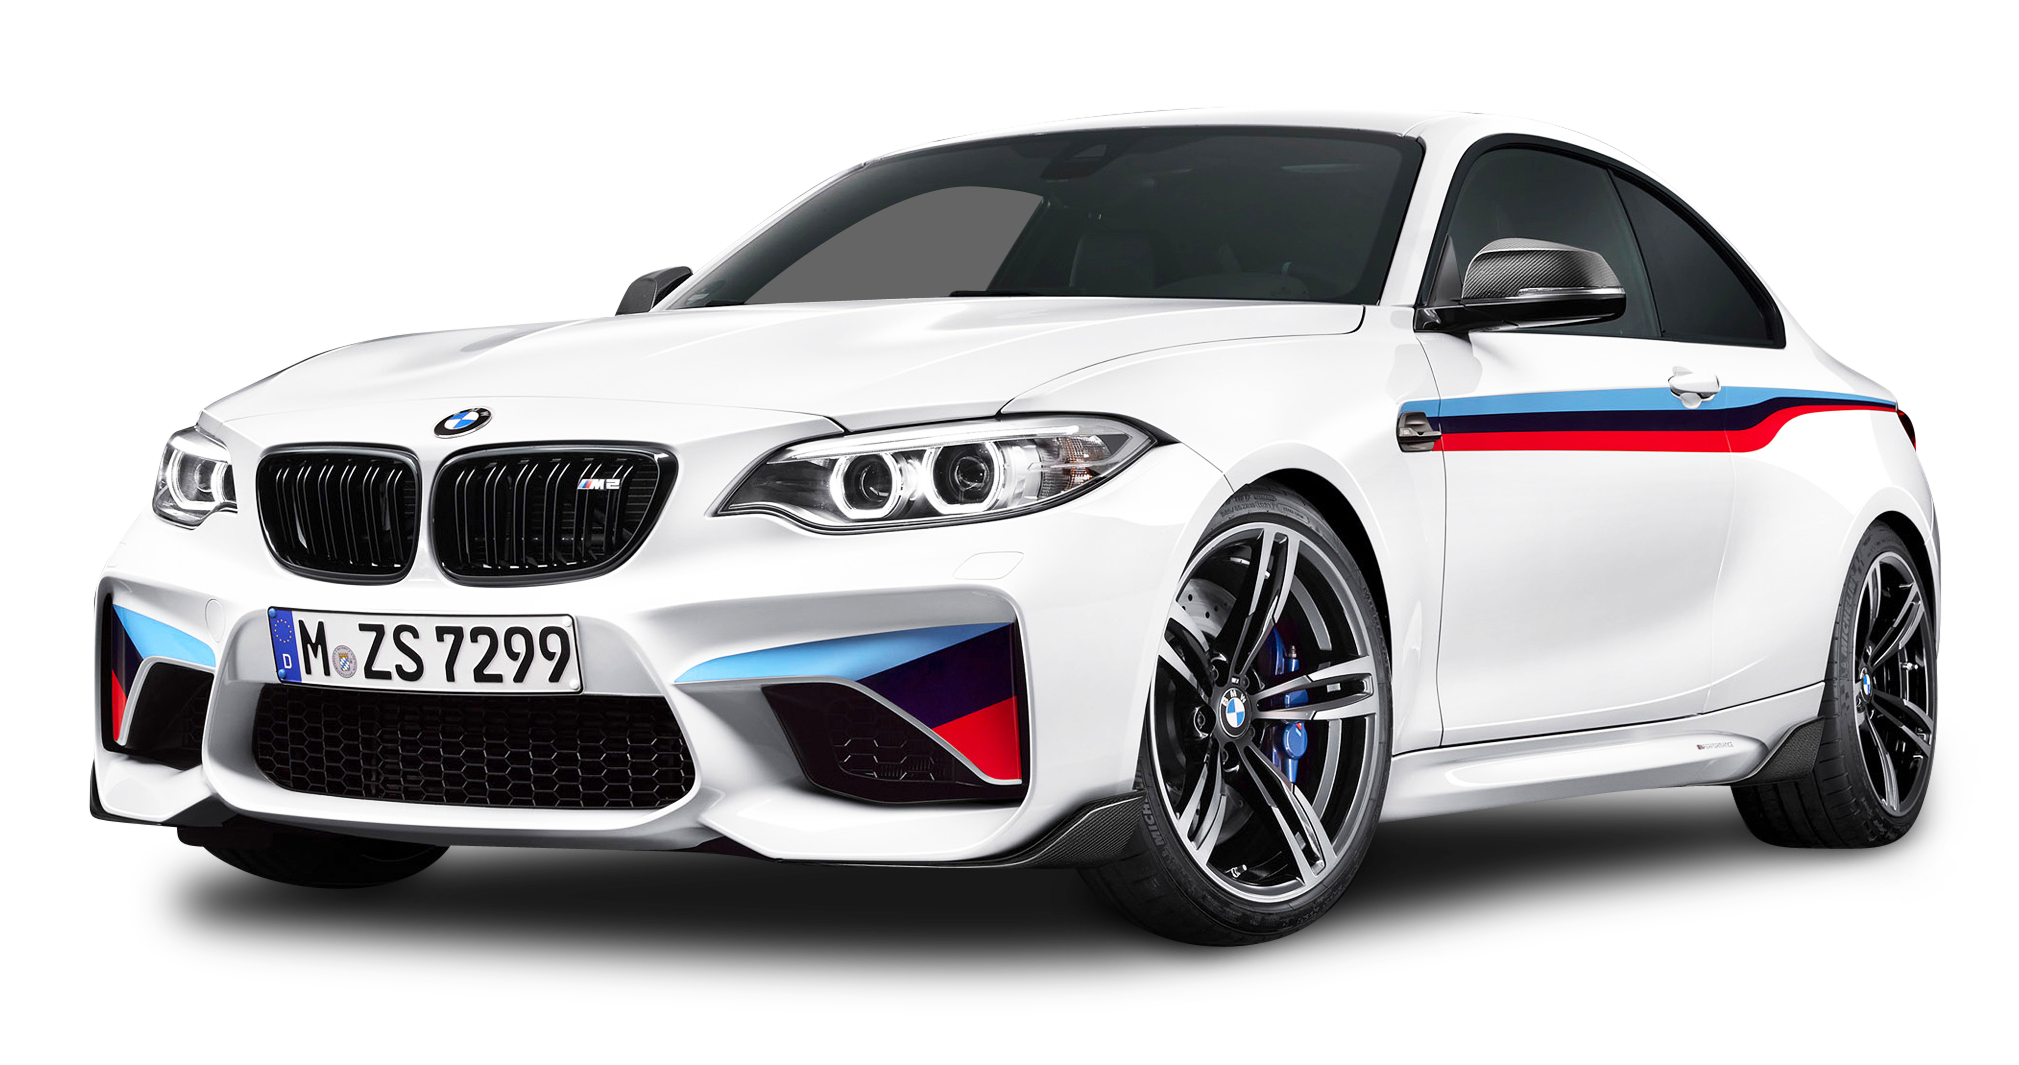 Accesorios BMW F30/32/80/82 – HHS TUNING